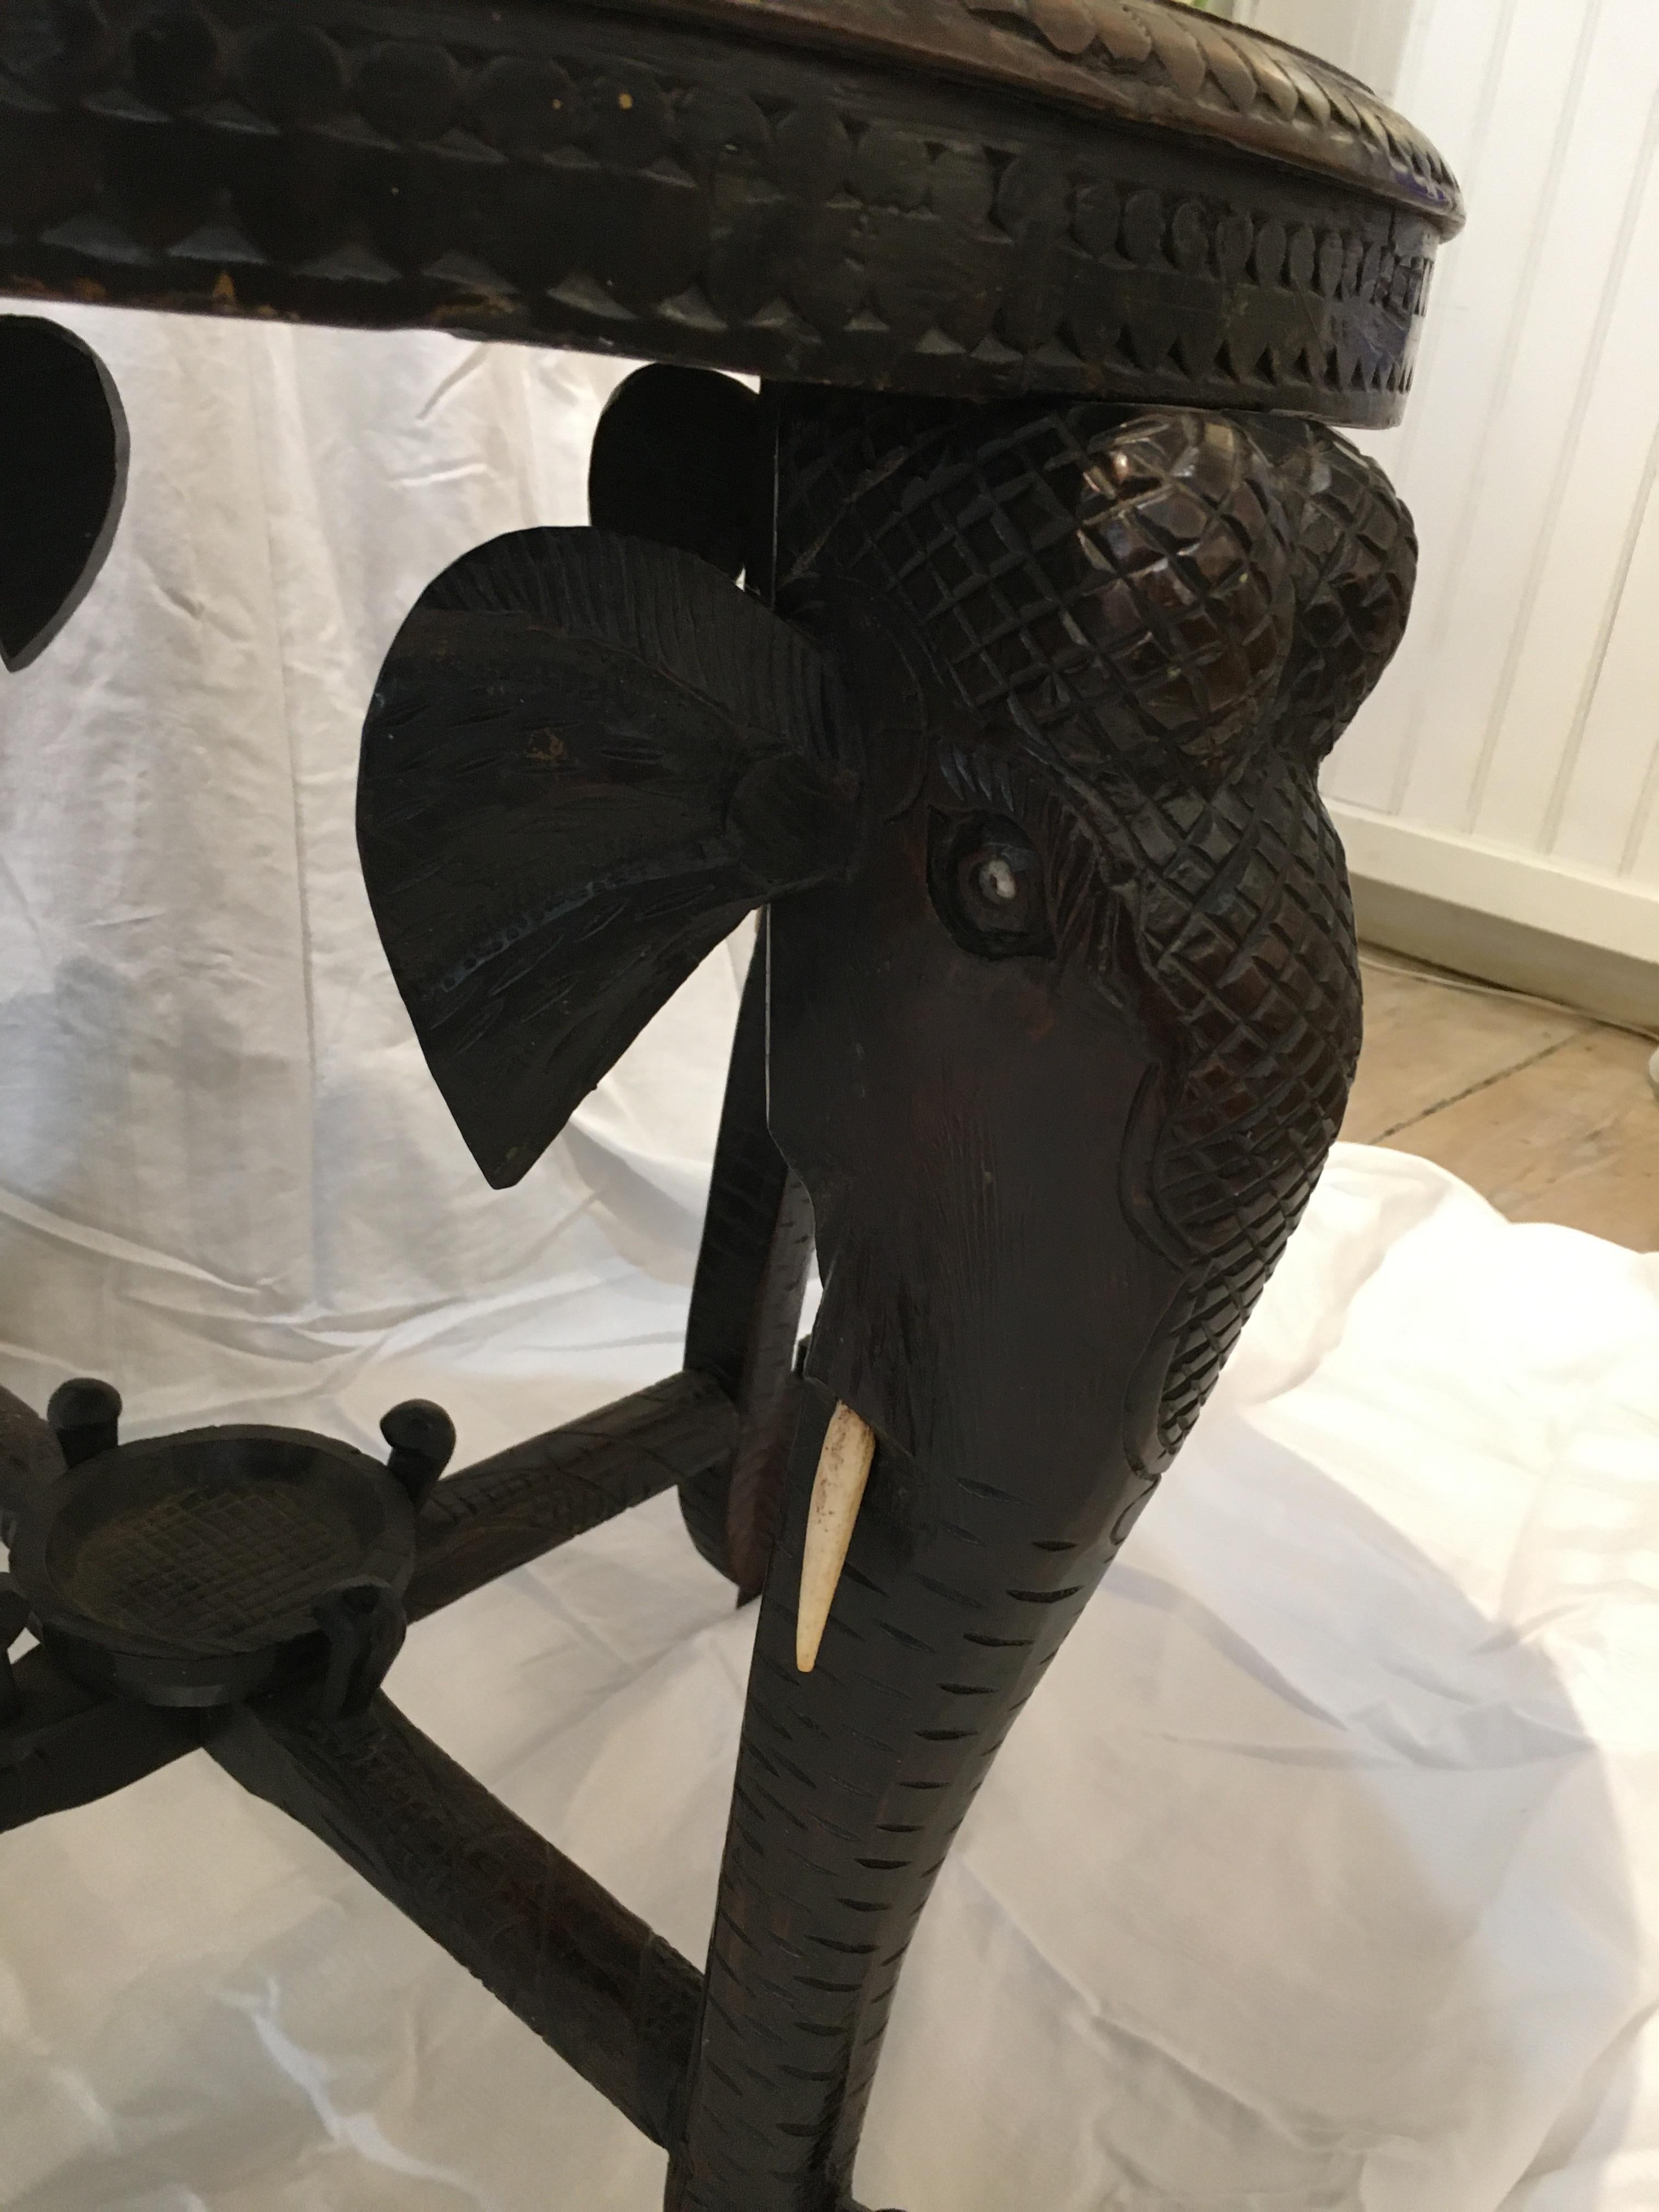 An intricately carved ebonized wood side or center table with bone inlay and featuring elephant head, tusk and trunk legs. Carved leaf patterns around the top border and a center full body elephant. The inlays are flowers and vines along with two